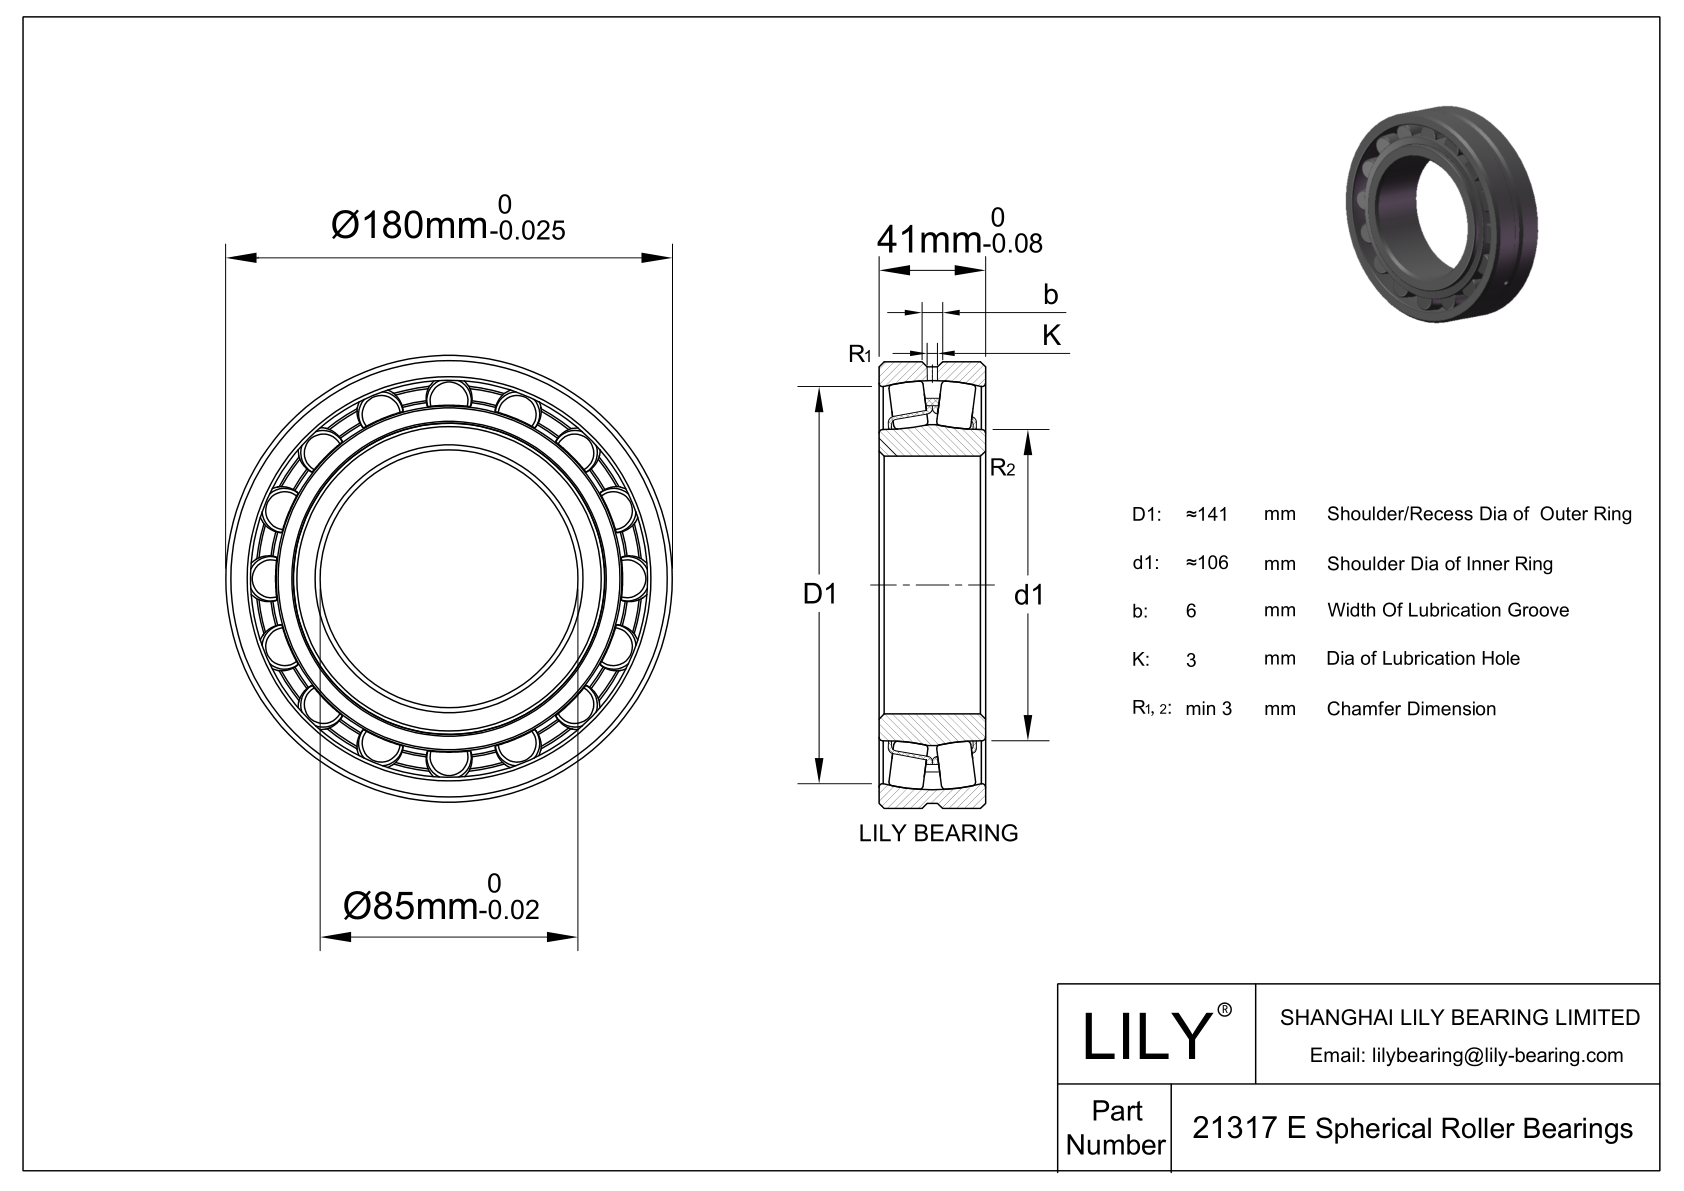 21317 E Double Row Spherical Roller Bearing cad drawing